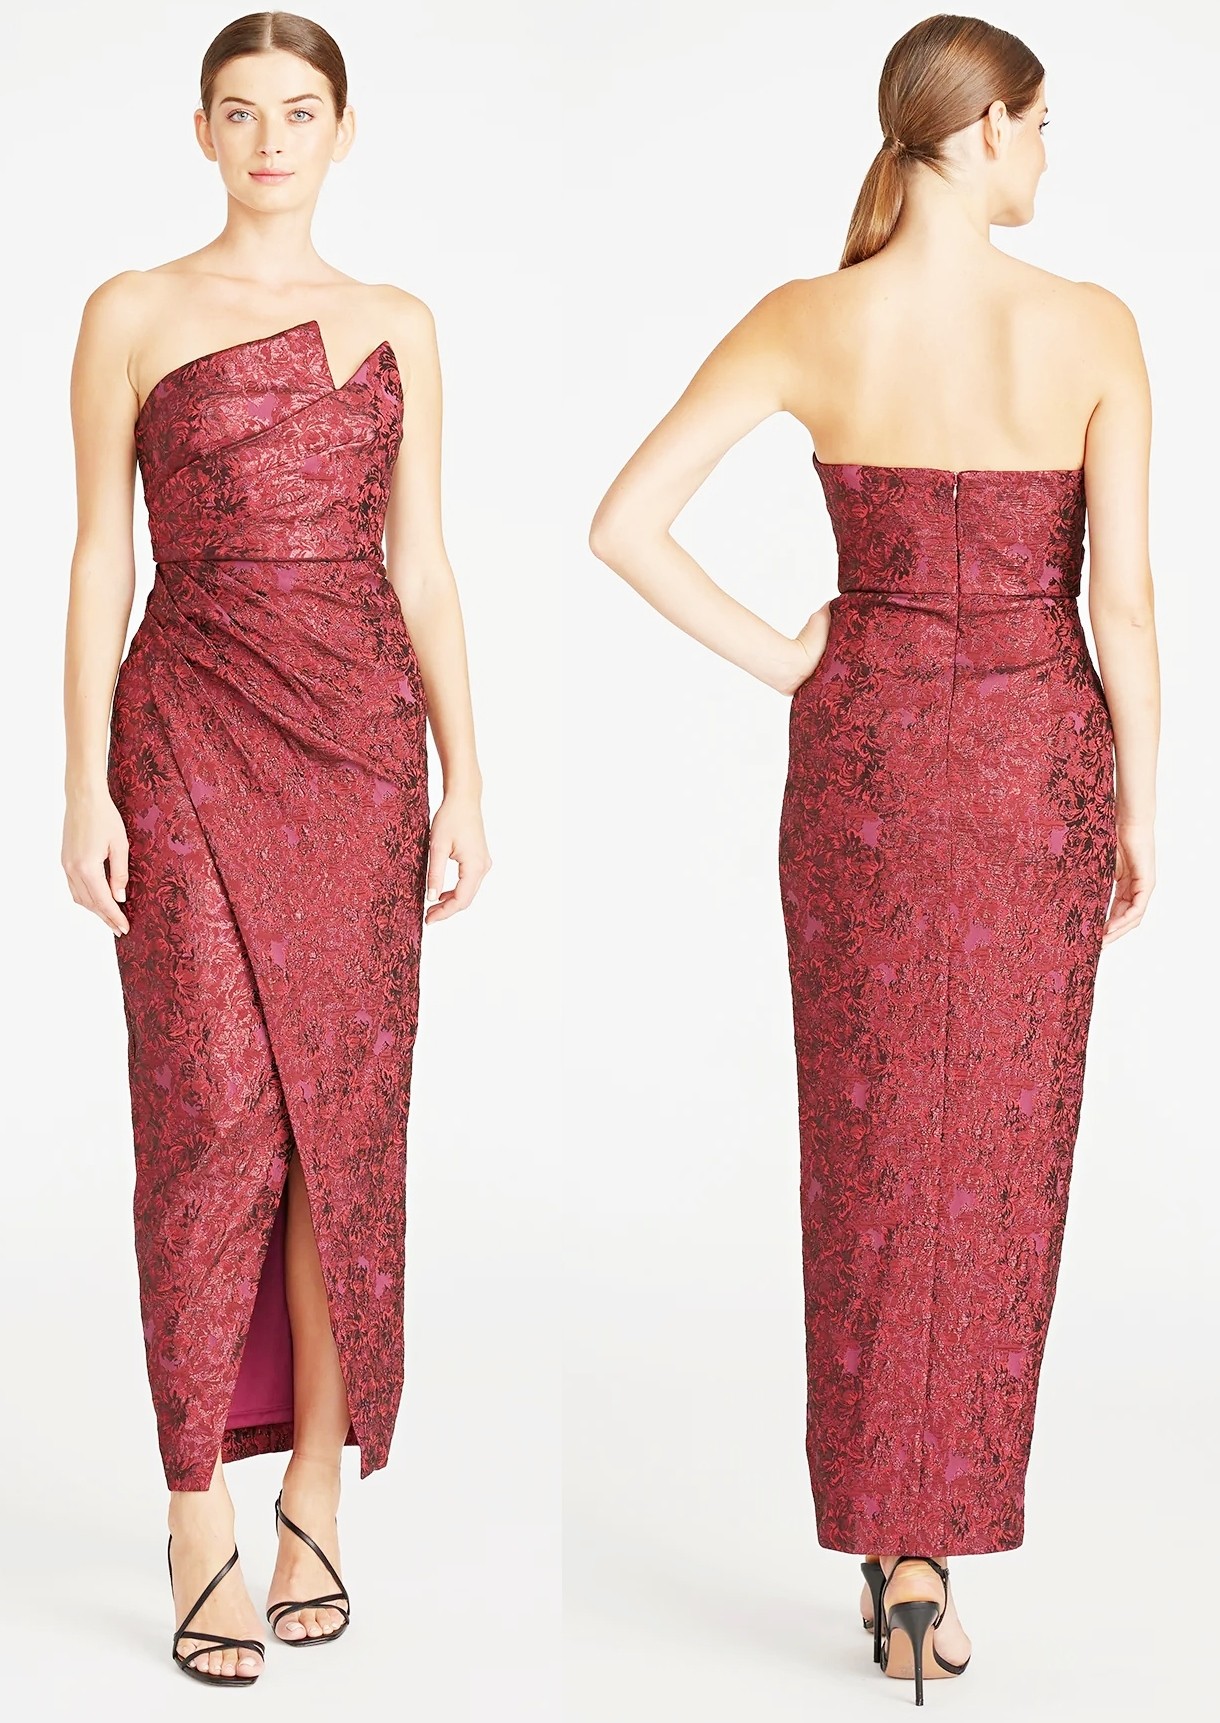 HARMONY ASYMMETRICAL GOWN - Pantone’s Color of the Year, Viva Magenta 18-1750